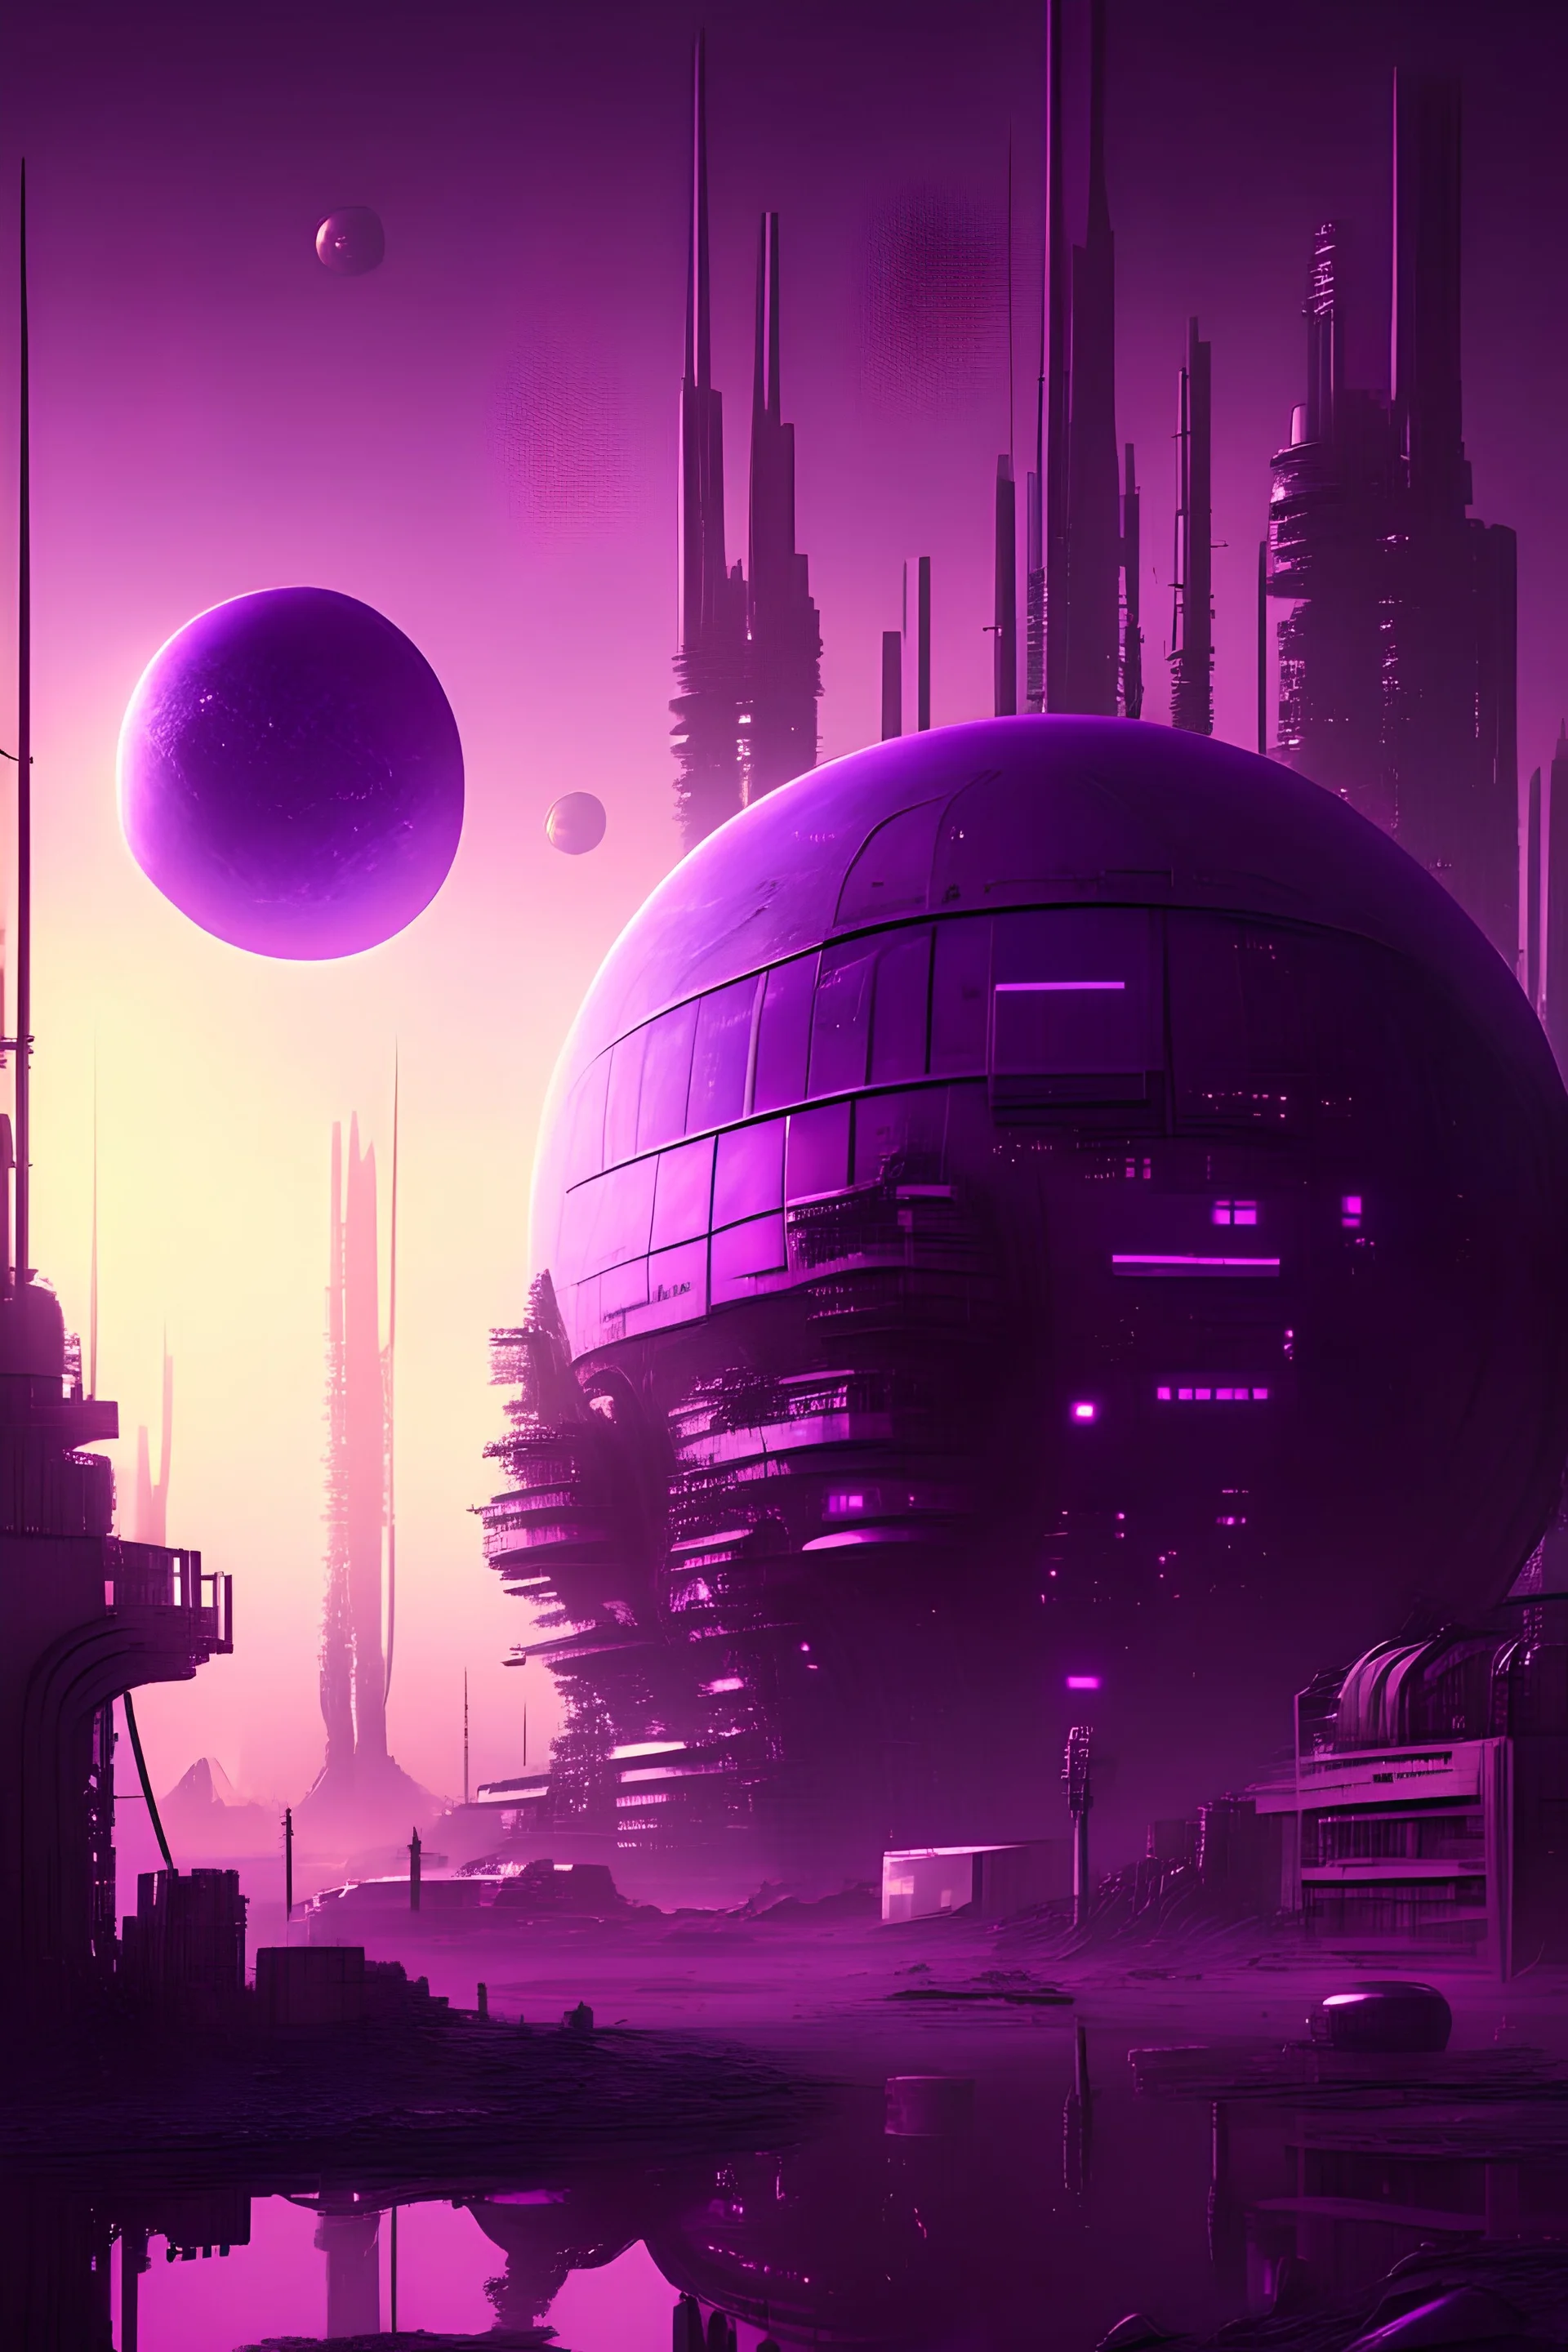 realistic industrial sci-fi city on a purple crystal planet, shot at dawn